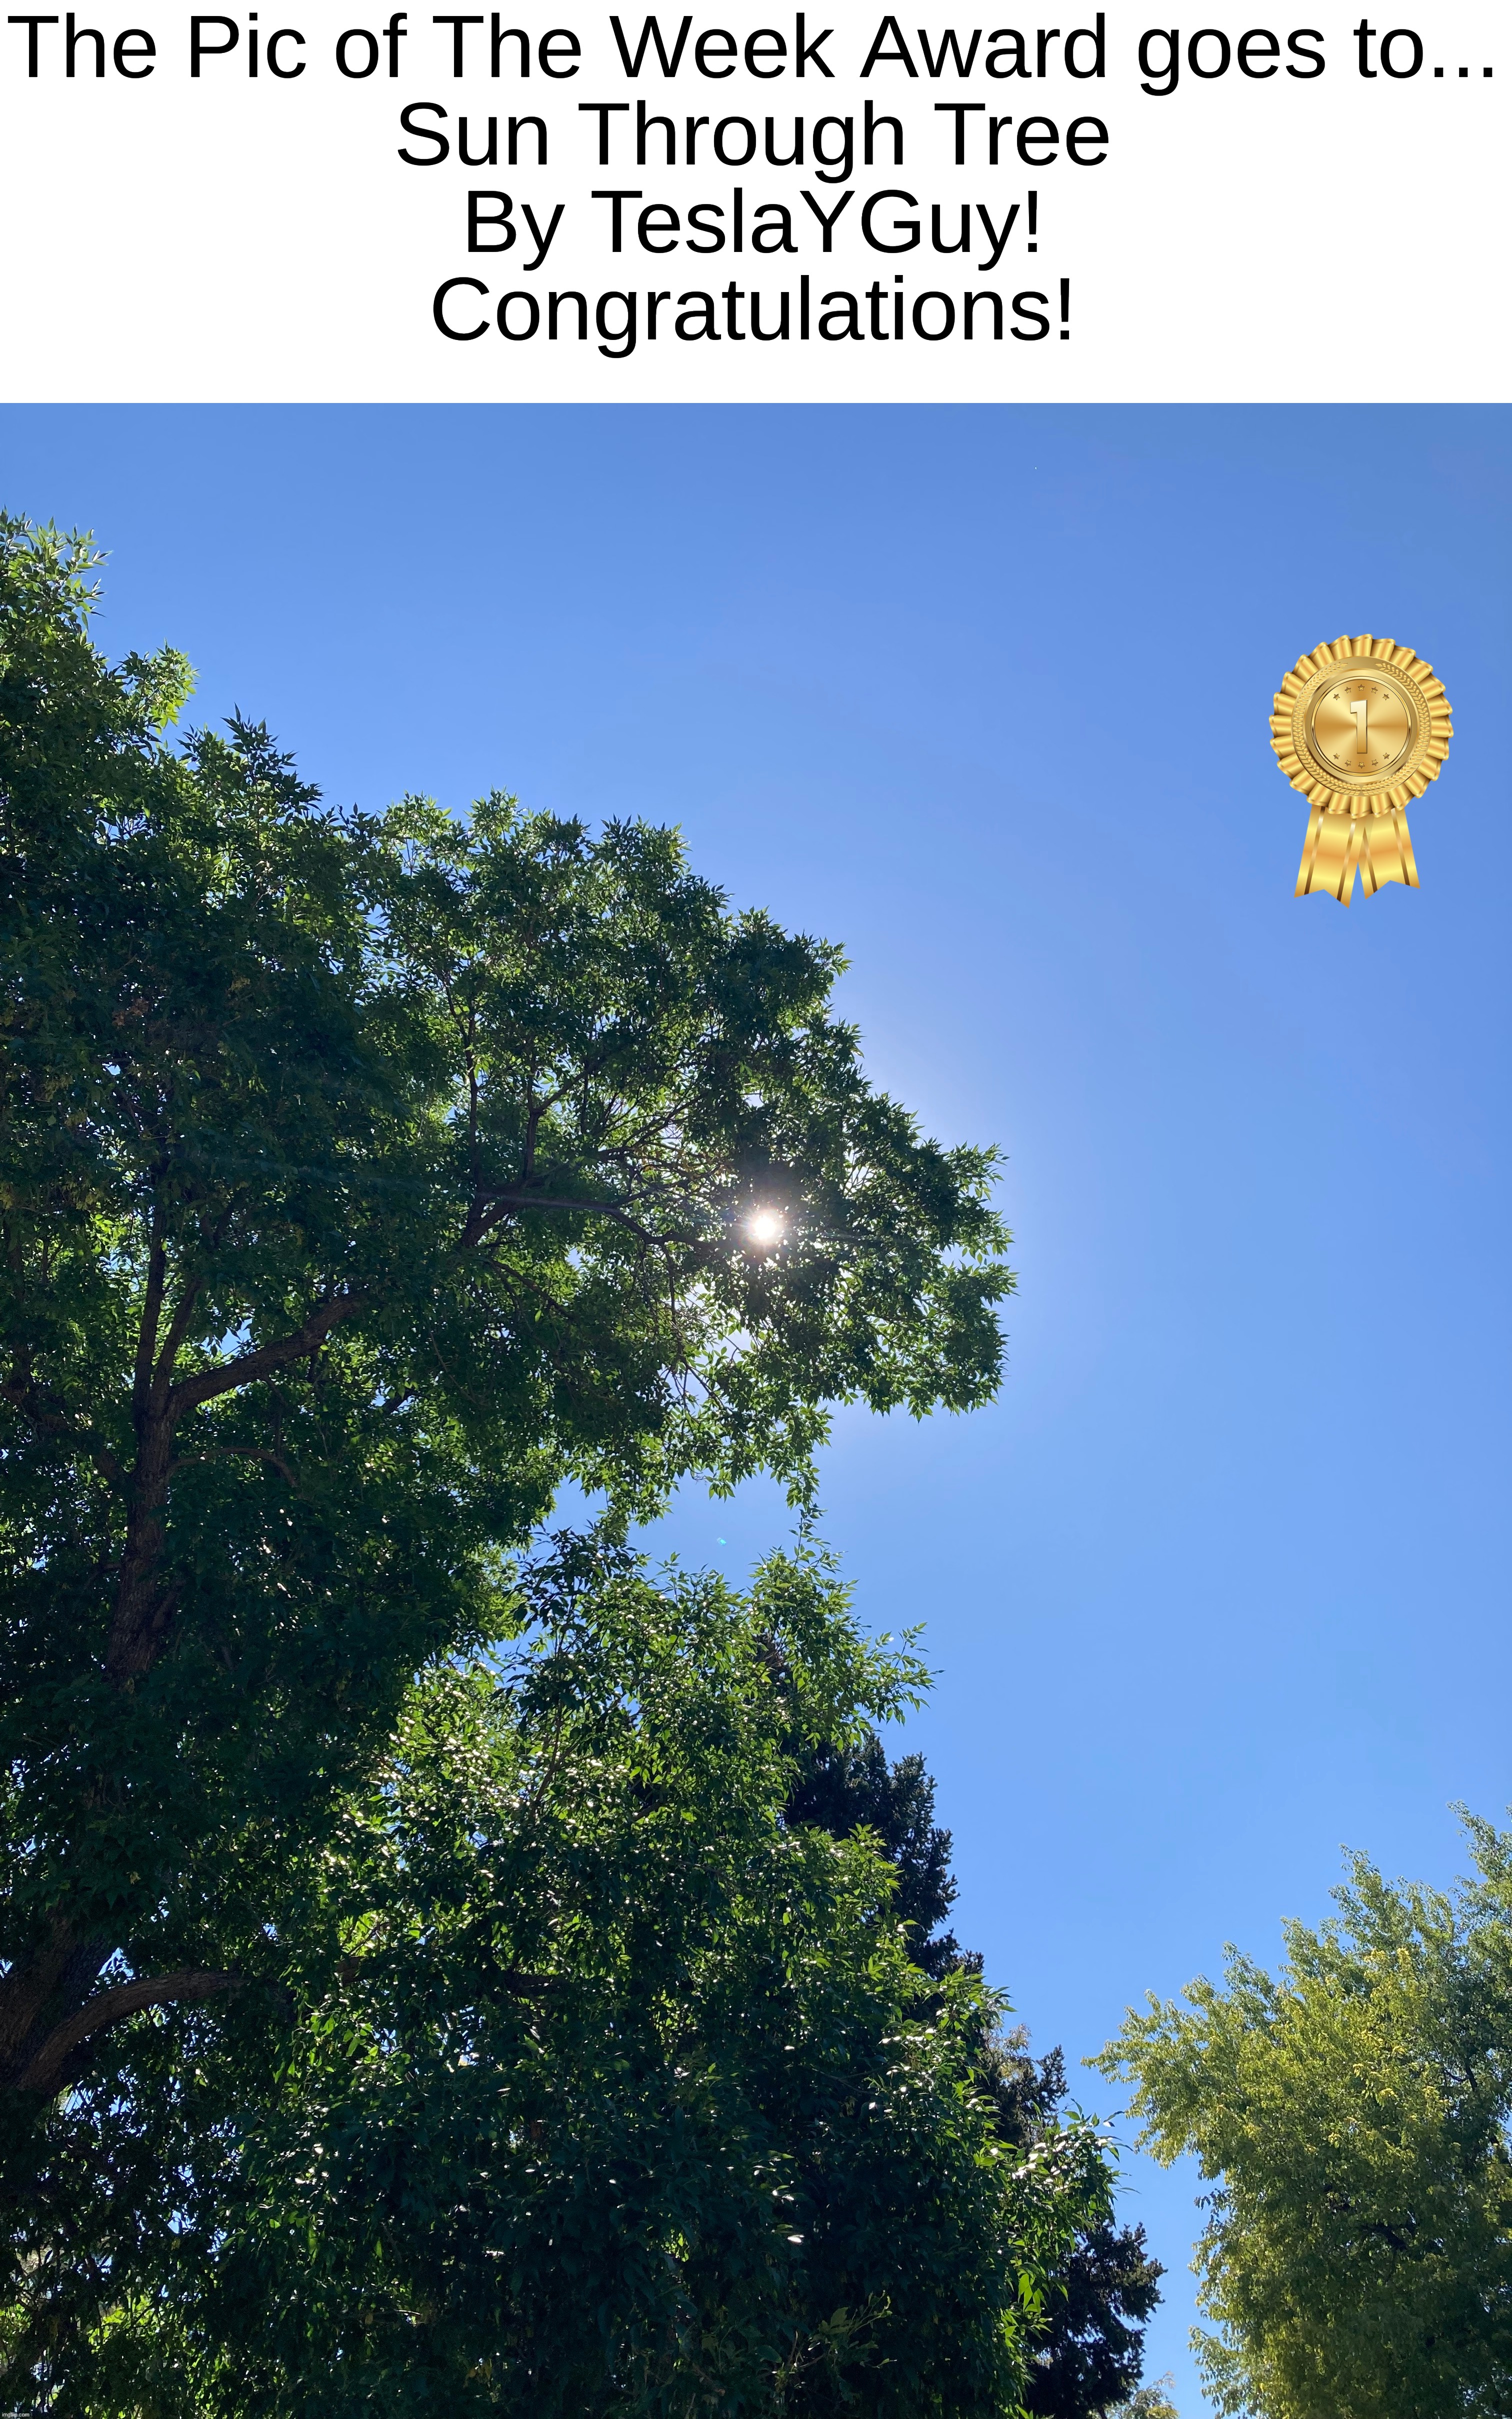 Sun Through Tree by @TeslaYGuy https://imgflip.com/i/7z4axt | The Pic of The Week Award goes to...
Sun Through Tree
By TeslaYGuy!
Congratulations! | image tagged in share your own photos | made w/ Imgflip meme maker